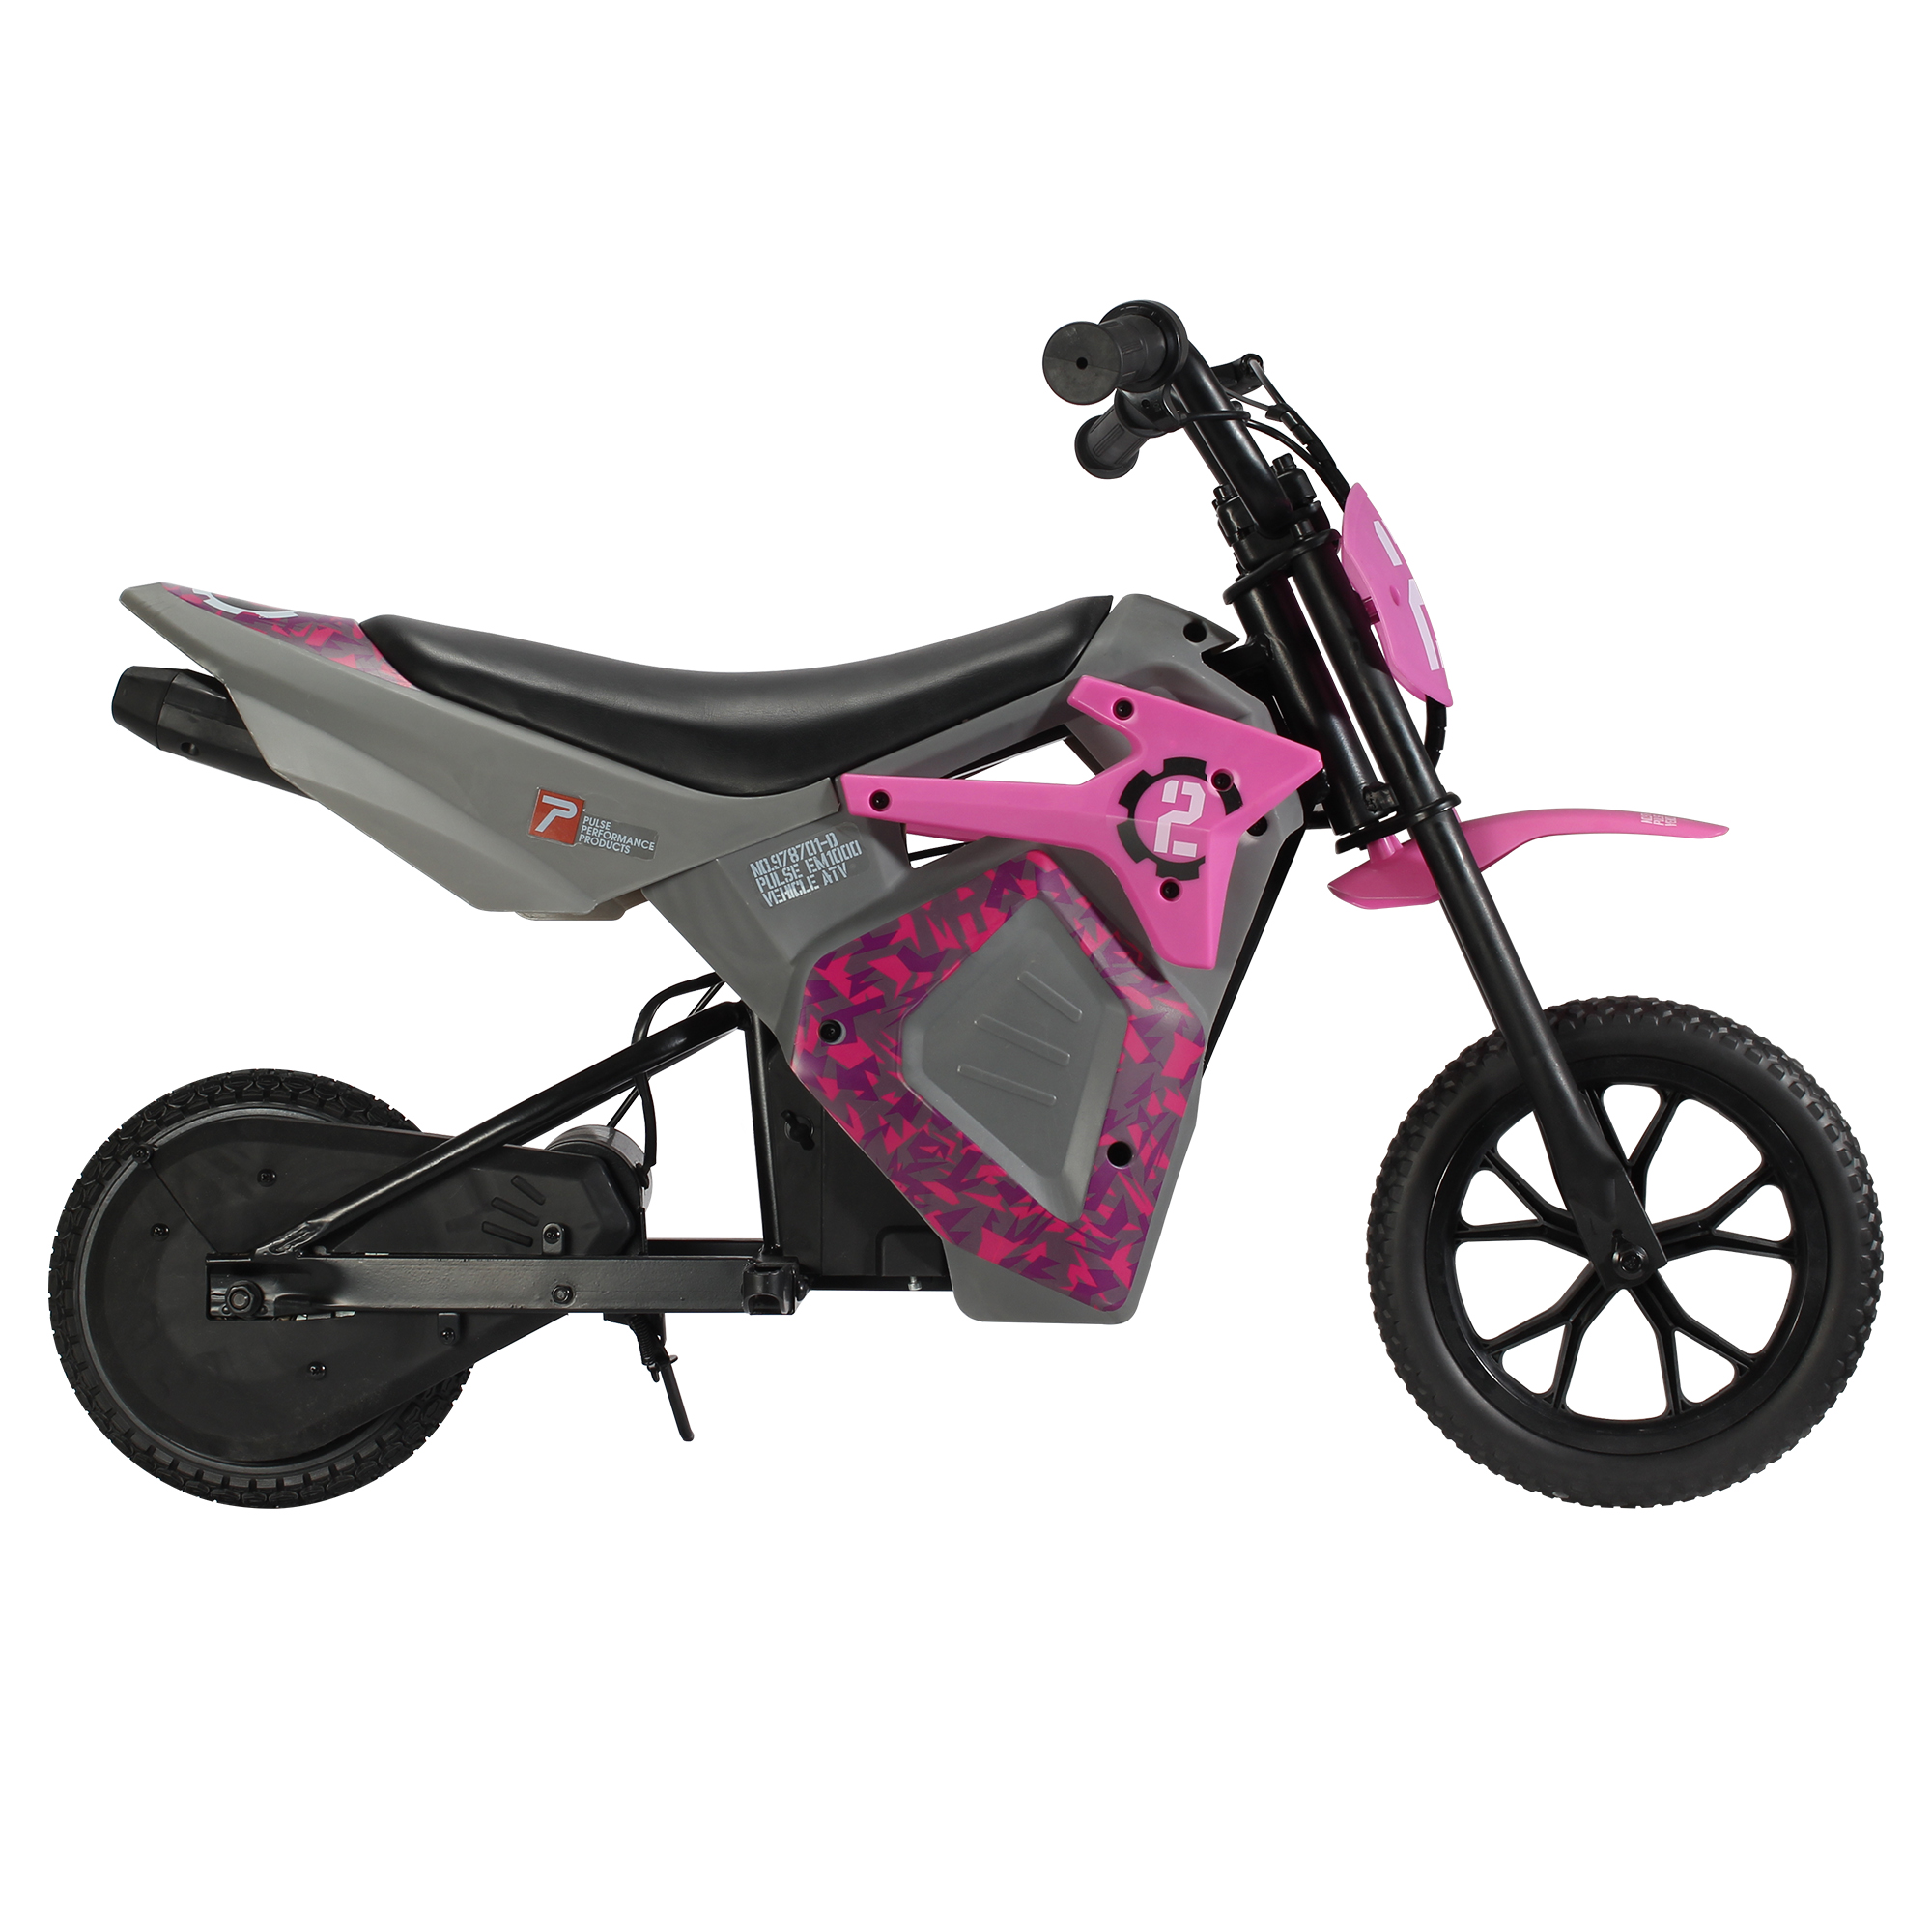 Pulse Performance Products, EM-1000 Kids Electric Motorcycle, Ages 8+, 24V battery, 10 MPH, Puncture Proof Tires, hand Brake - image 4 of 8